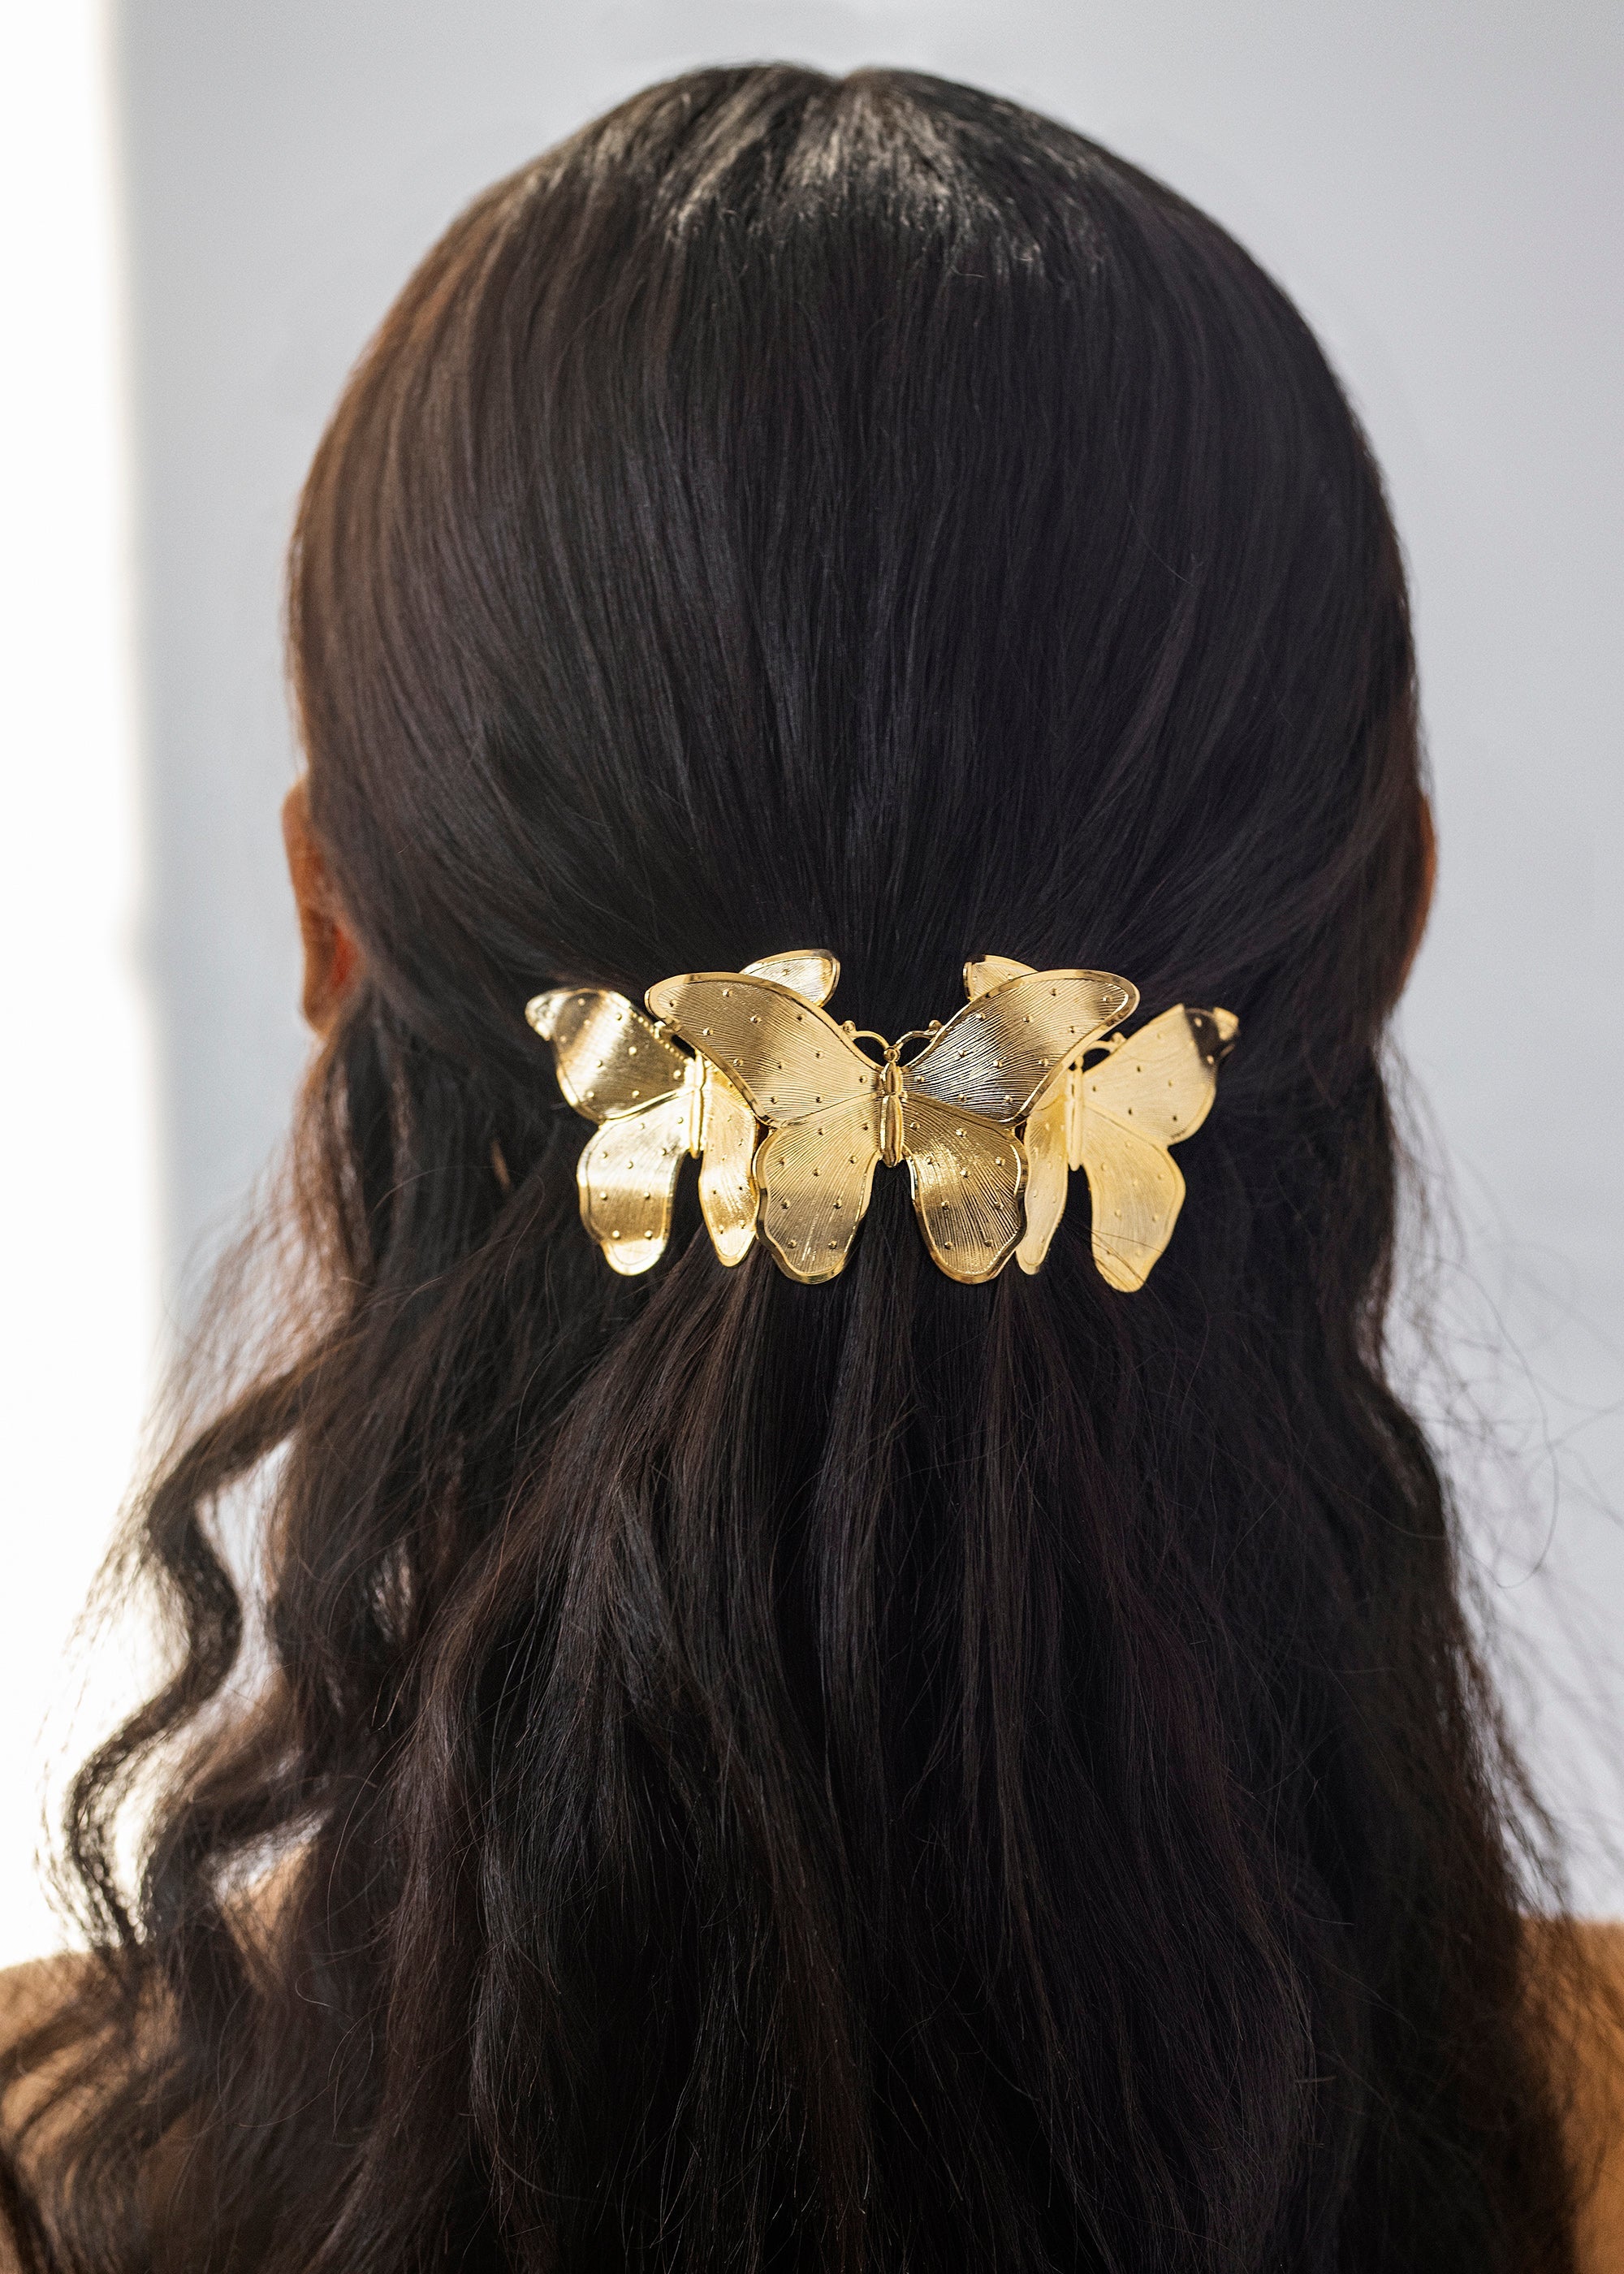 ELYSIAN FIELDS PONY CUFF - Epona Valley | Luxury Hair Accessories | Bridal Accessories | Made In NYC